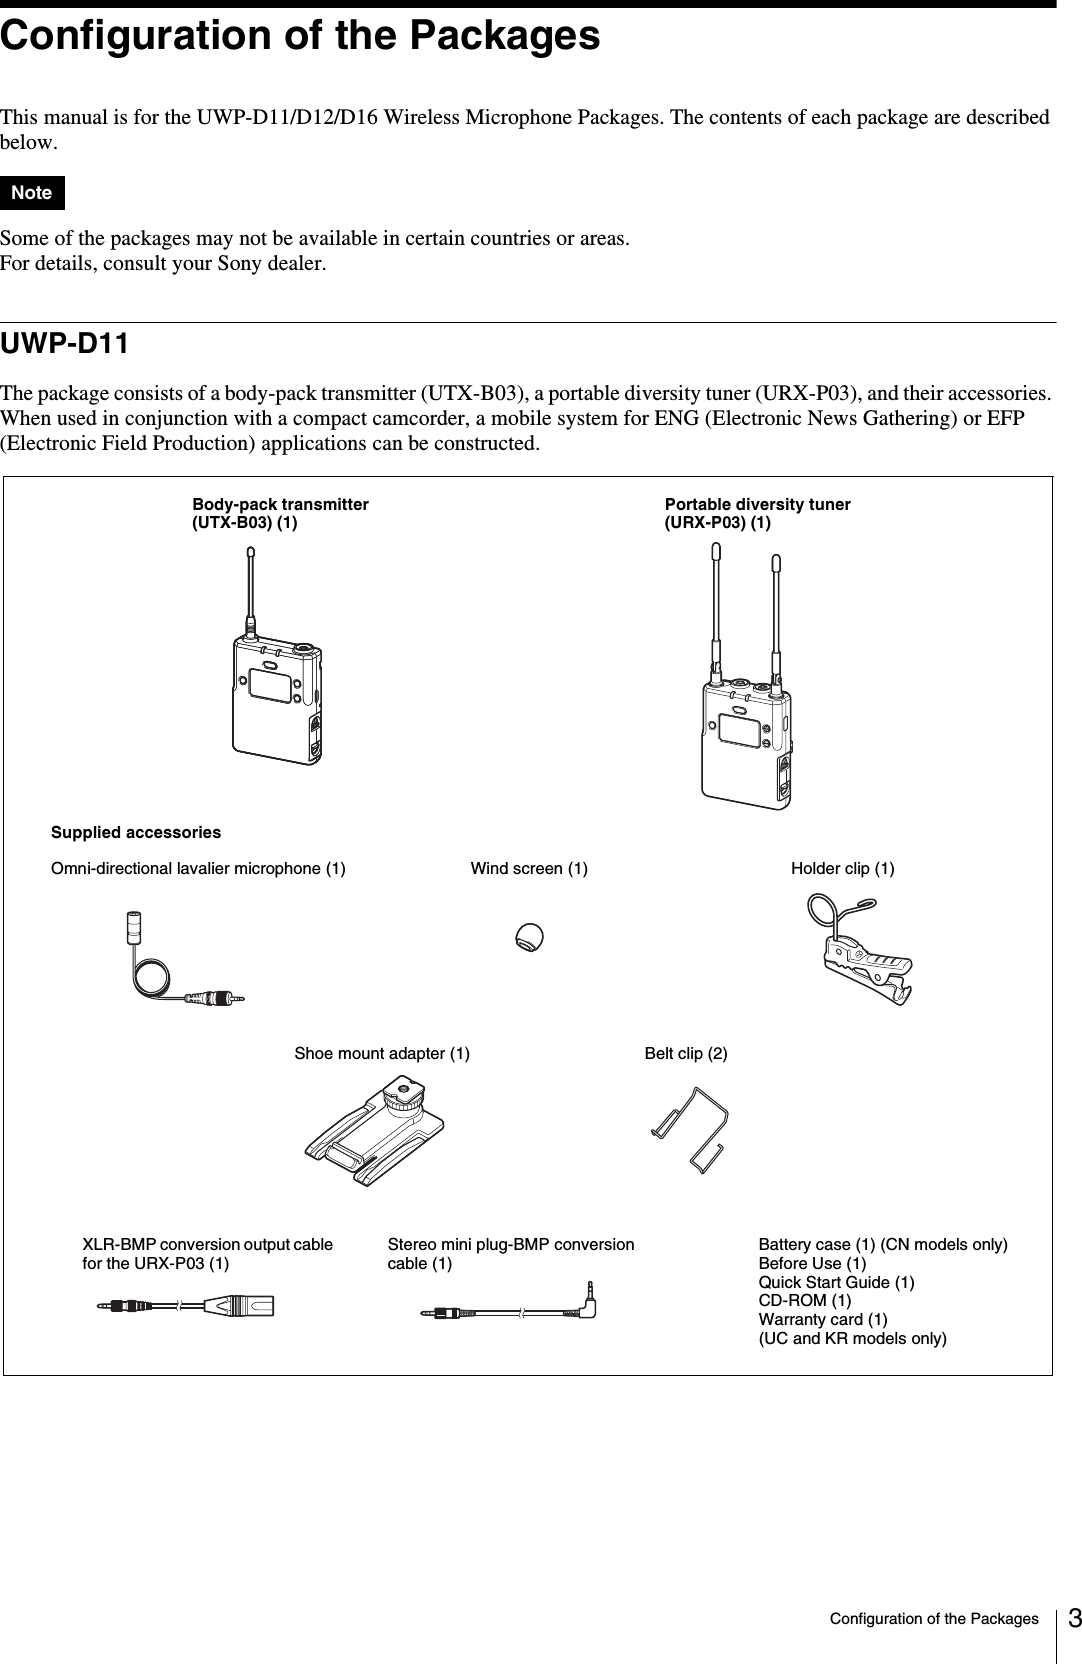 Configuration of the Packages 3Configuration of the PackagesThis manual is for the UWP-D11/D12/D16 Wireless Microphone Packages. The contents of each package are described below.Some of the packages may not be available in certain countries or areas.For details, consult your Sony dealer.UWP-D11The package consists of a body-pack transmitter (UTX-B03), a portable diversity tuner (URX-P03), and their accessories. When used in conjunction with a compact camcorder, a mobile system for ENG (Electronic News Gathering) or EFP (Electronic Field Production) applications can be constructed.NoteBody-pack transmitter (UTX-B03) (1)Portable diversity tuner (URX-P03) (1)Supplied accessoriesWind screen (1)Omni-directional lavalier microphone (1) Holder clip (1)Shoe mount adapter (1) Belt clip (2)Battery case (1) (CN models only)Before Use (1)Quick Start Guide (1)CD-ROM (1)Warranty card (1) (UC and KR models only)Stereo mini plug-BMP conversion cable (1)XLR-BMP conversion output cable for the URX-P03 (1)